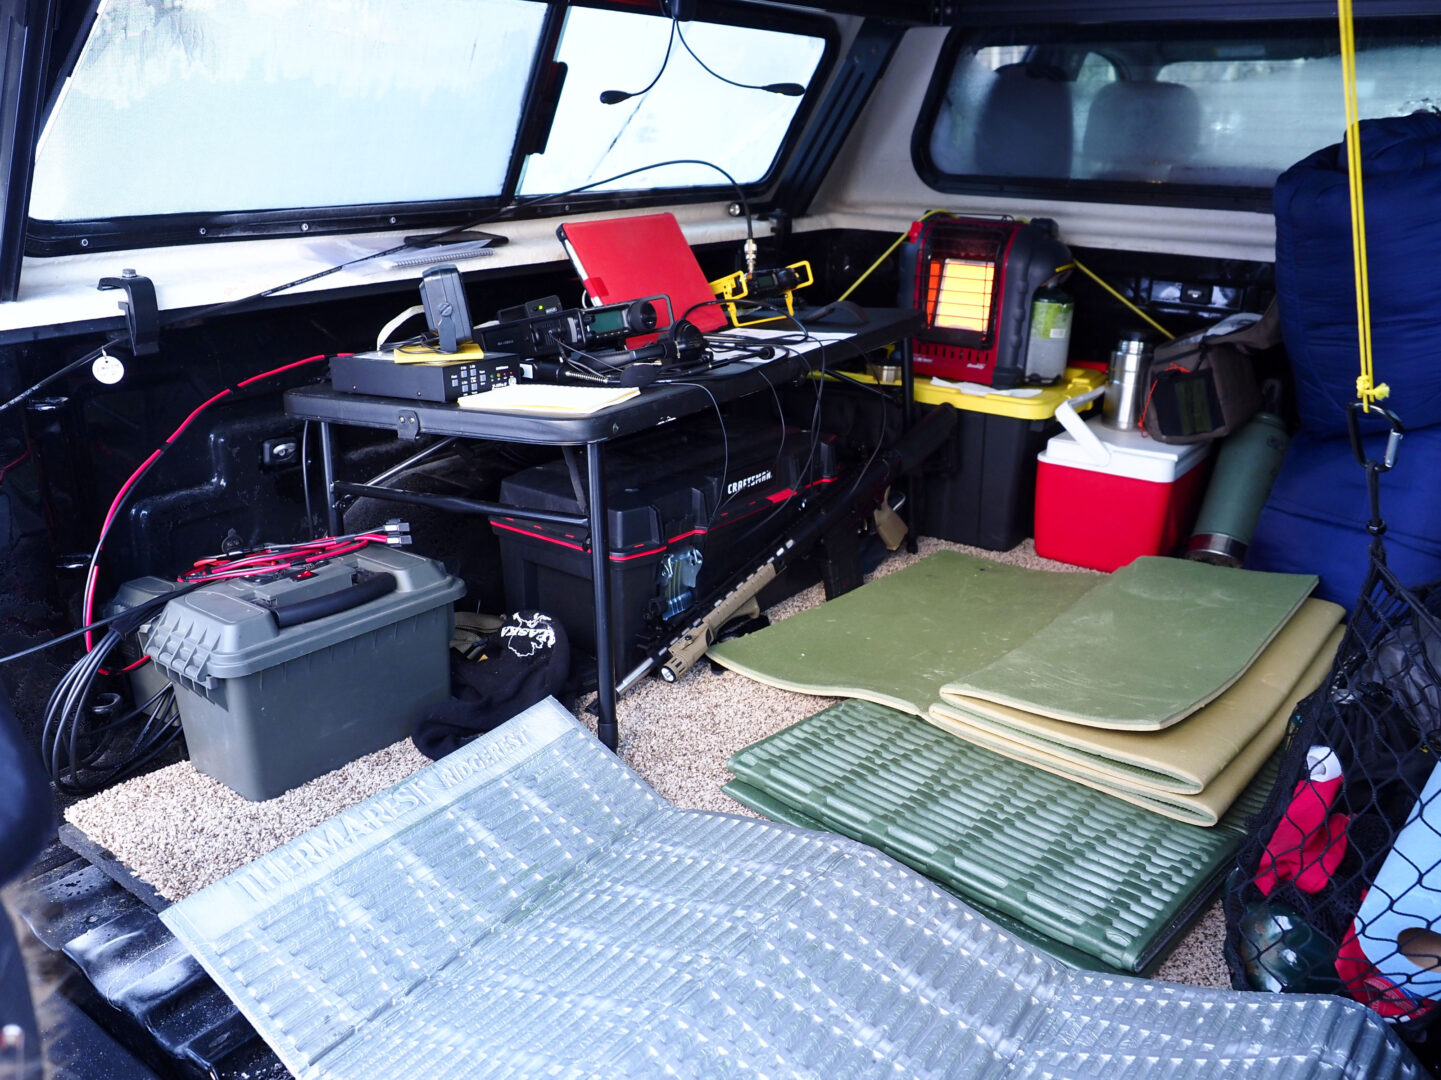 Ham radio station set up in the back of the truck